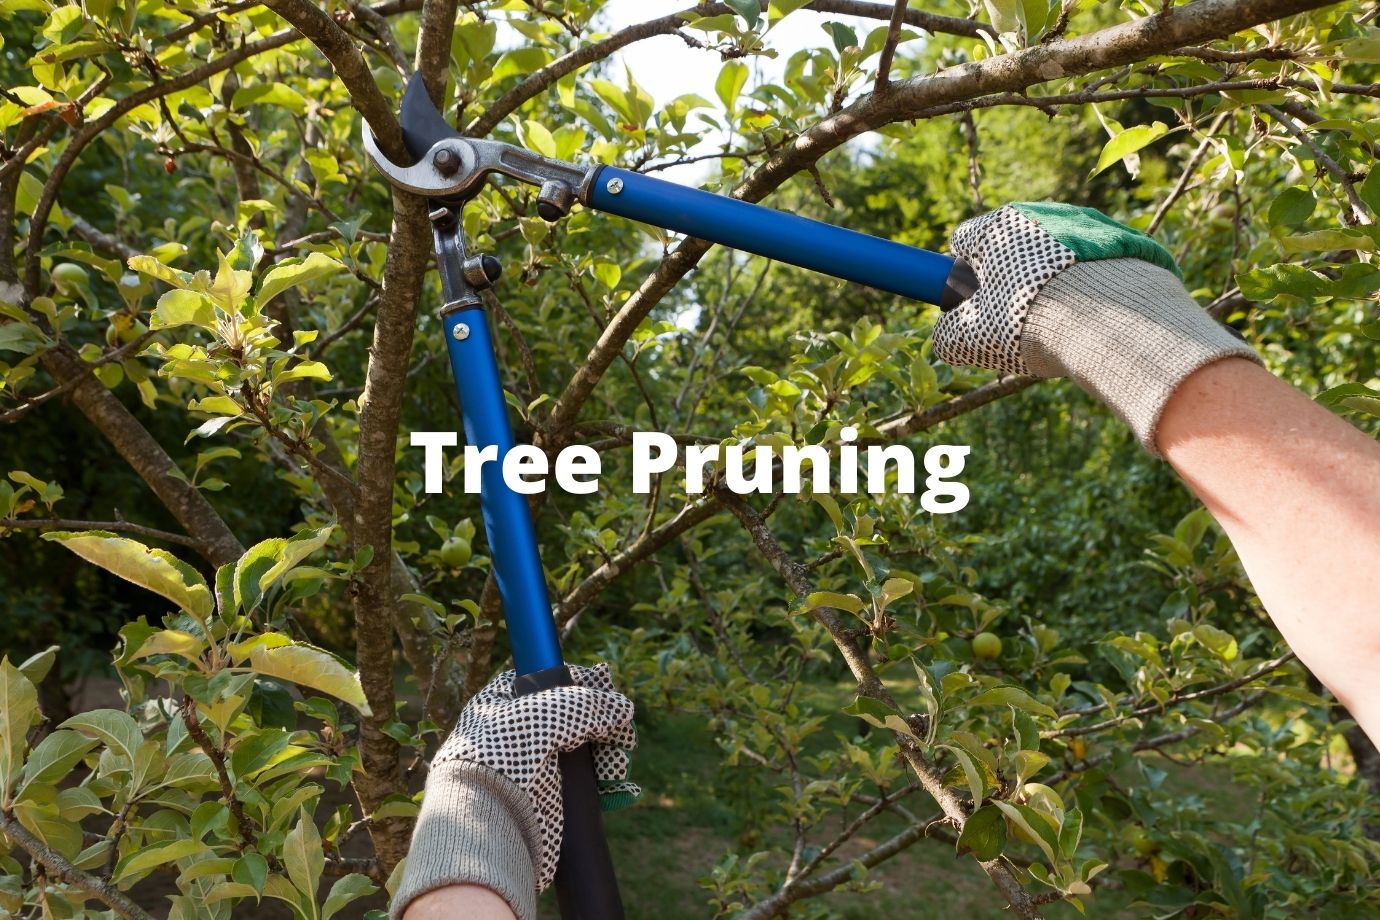 What are Tree Pruning and Trimming Service? How do they Help Trees?